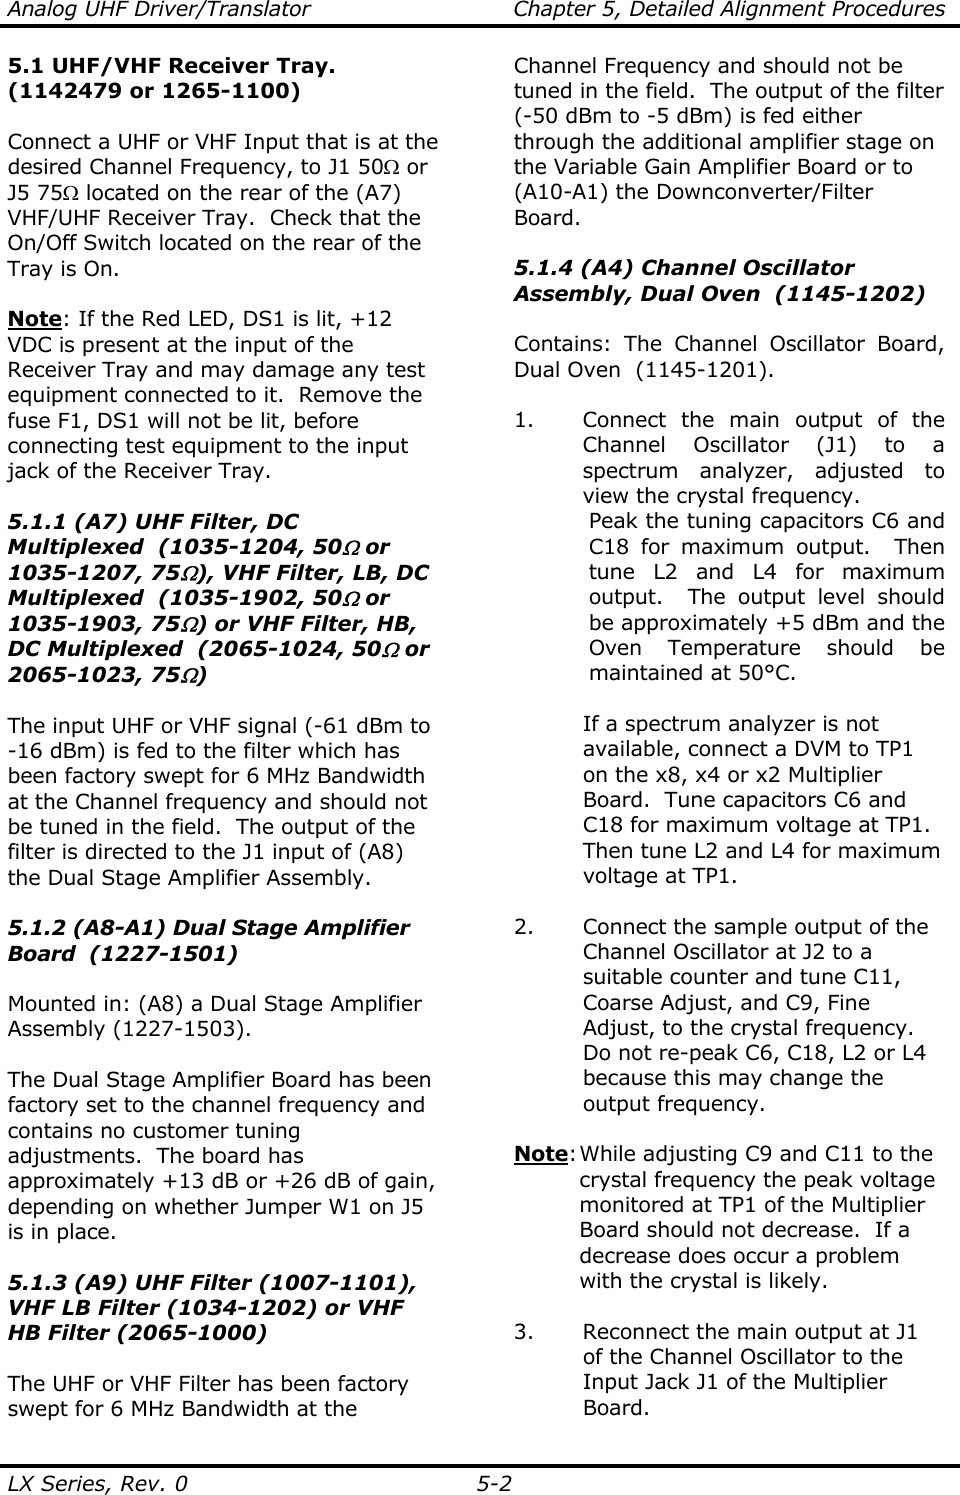 Analog UHF Driver/Translator  Chapter 5, Detailed Alignment Procedures  LX Series, Rev. 0  5-2 5.1 UHF/VHF Receiver Tray. (1142479 or 1265-1100)  Connect a UHF or VHF Input that is at the desired Channel Frequency, to J1 50Ω or J5 75Ω located on the rear of the (A7) VHF/UHF Receiver Tray.  Check that the On/Off Switch located on the rear of the Tray is On.  Note: If the Red LED, DS1 is lit, +12 VDC is present at the input of the Receiver Tray and may damage any test equipment connected to it.  Remove the fuse F1, DS1 will not be lit, before connecting test equipment to the input jack of the Receiver Tray.  5.1.1 (A7) UHF Filter, DC Multiplexed  (1035-1204, 50Ω or 1035-1207, 75Ω), VHF Filter, LB, DC Multiplexed  (1035-1902, 50Ω or 1035-1903, 75Ω) or VHF Filter, HB, DC Multiplexed  (2065-1024, 50Ω or 2065-1023, 75Ω)  The input UHF or VHF signal (-61 dBm to -16 dBm) is fed to the filter which has been factory swept for 6 MHz Bandwidth at the Channel frequency and should not be tuned in the field.  The output of the filter is directed to the J1 input of (A8) the Dual Stage Amplifier Assembly.  5.1.2 (A8-A1) Dual Stage Amplifier Board  (1227-1501)  Mounted in: (A8) a Dual Stage Amplifier Assembly (1227-1503).  The Dual Stage Amplifier Board has been factory set to the channel frequency and contains no customer tuning adjustments.  The board has approximately +13 dB or +26 dB of gain, depending on whether Jumper W1 on J5 is in place.  5.1.3 (A9) UHF Filter (1007-1101), VHF LB Filter (1034-1202) or VHF HB Filter (2065-1000)  The UHF or VHF Filter has been factory swept for 6 MHz Bandwidth at the Channel Frequency and should not be tuned in the field.  The output of the filter (-50 dBm to -5 dBm) is fed either through the additional amplifier stage on the Variable Gain Amplifier Board or to (A10-A1) the Downconverter/Filter Board.  5.1.4 (A4) Channel Oscillator Assembly, Dual Oven  (1145-1202)  Contains: The Channel Oscillator Board, Dual Oven  (1145-1201).  1. Connect the main output of the Channel Oscillator (J1) to a spectrum analyzer, adjusted to view the crystal frequency. Peak the tuning capacitors C6 and C18 for maximum output.  Then tune L2 and L4 for maximum output.  The output level should be approximately +5 dBm and the Oven Temperature should be maintained at 50°C.    If a spectrum analyzer is not available, connect a DVM to TP1 on the x8, x4 or x2 Multiplier Board.  Tune capacitors C6 and C18 for maximum voltage at TP1.  Then tune L2 and L4 for maximum voltage at TP1.  2.  Connect the sample output of the Channel Oscillator at J2 to a suitable counter and tune C11, Coarse Adjust, and C9, Fine Adjust, to the crystal frequency.  Do not re-peak C6, C18, L2 or L4 because this may change the output frequency.  Note: While adjusting C9 and C11 to the crystal frequency the peak voltage monitored at TP1 of the Multiplier Board should not decrease.  If a decrease does occur a problem with the crystal is likely.   3.  Reconnect the main output at J1 of the Channel Oscillator to the Input Jack J1 of the Multiplier Board. 